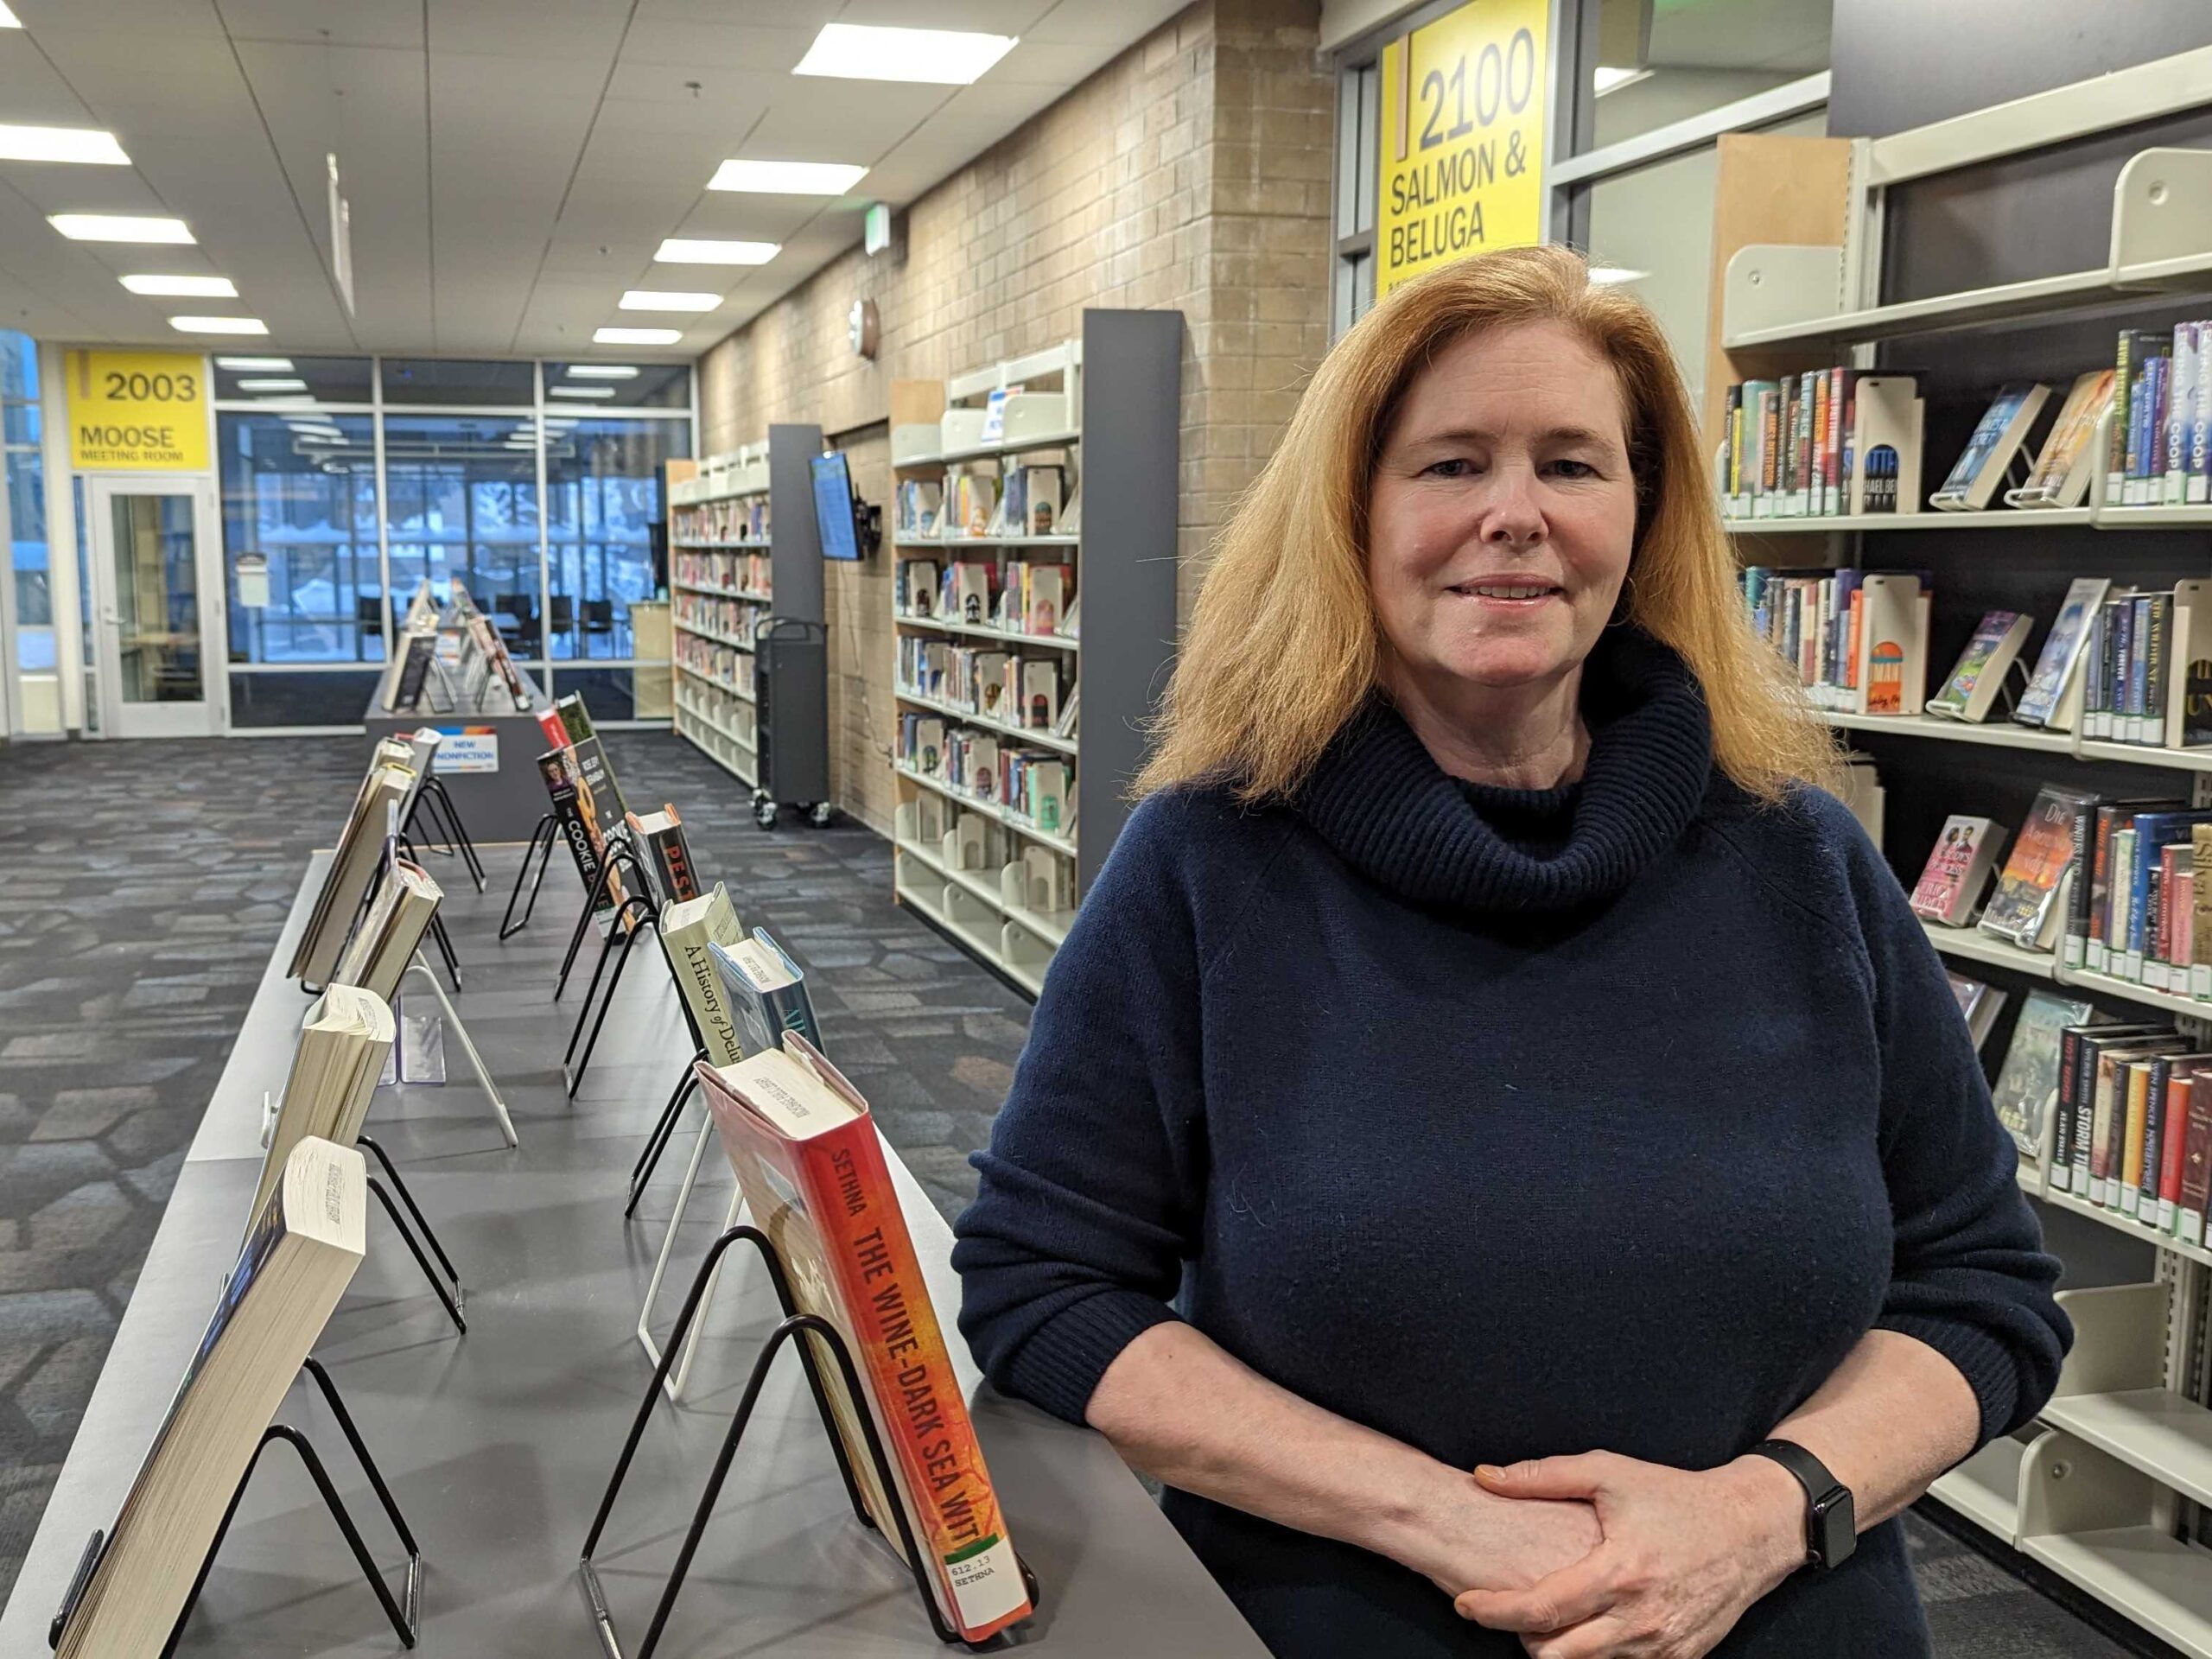 A woman poses in front of books